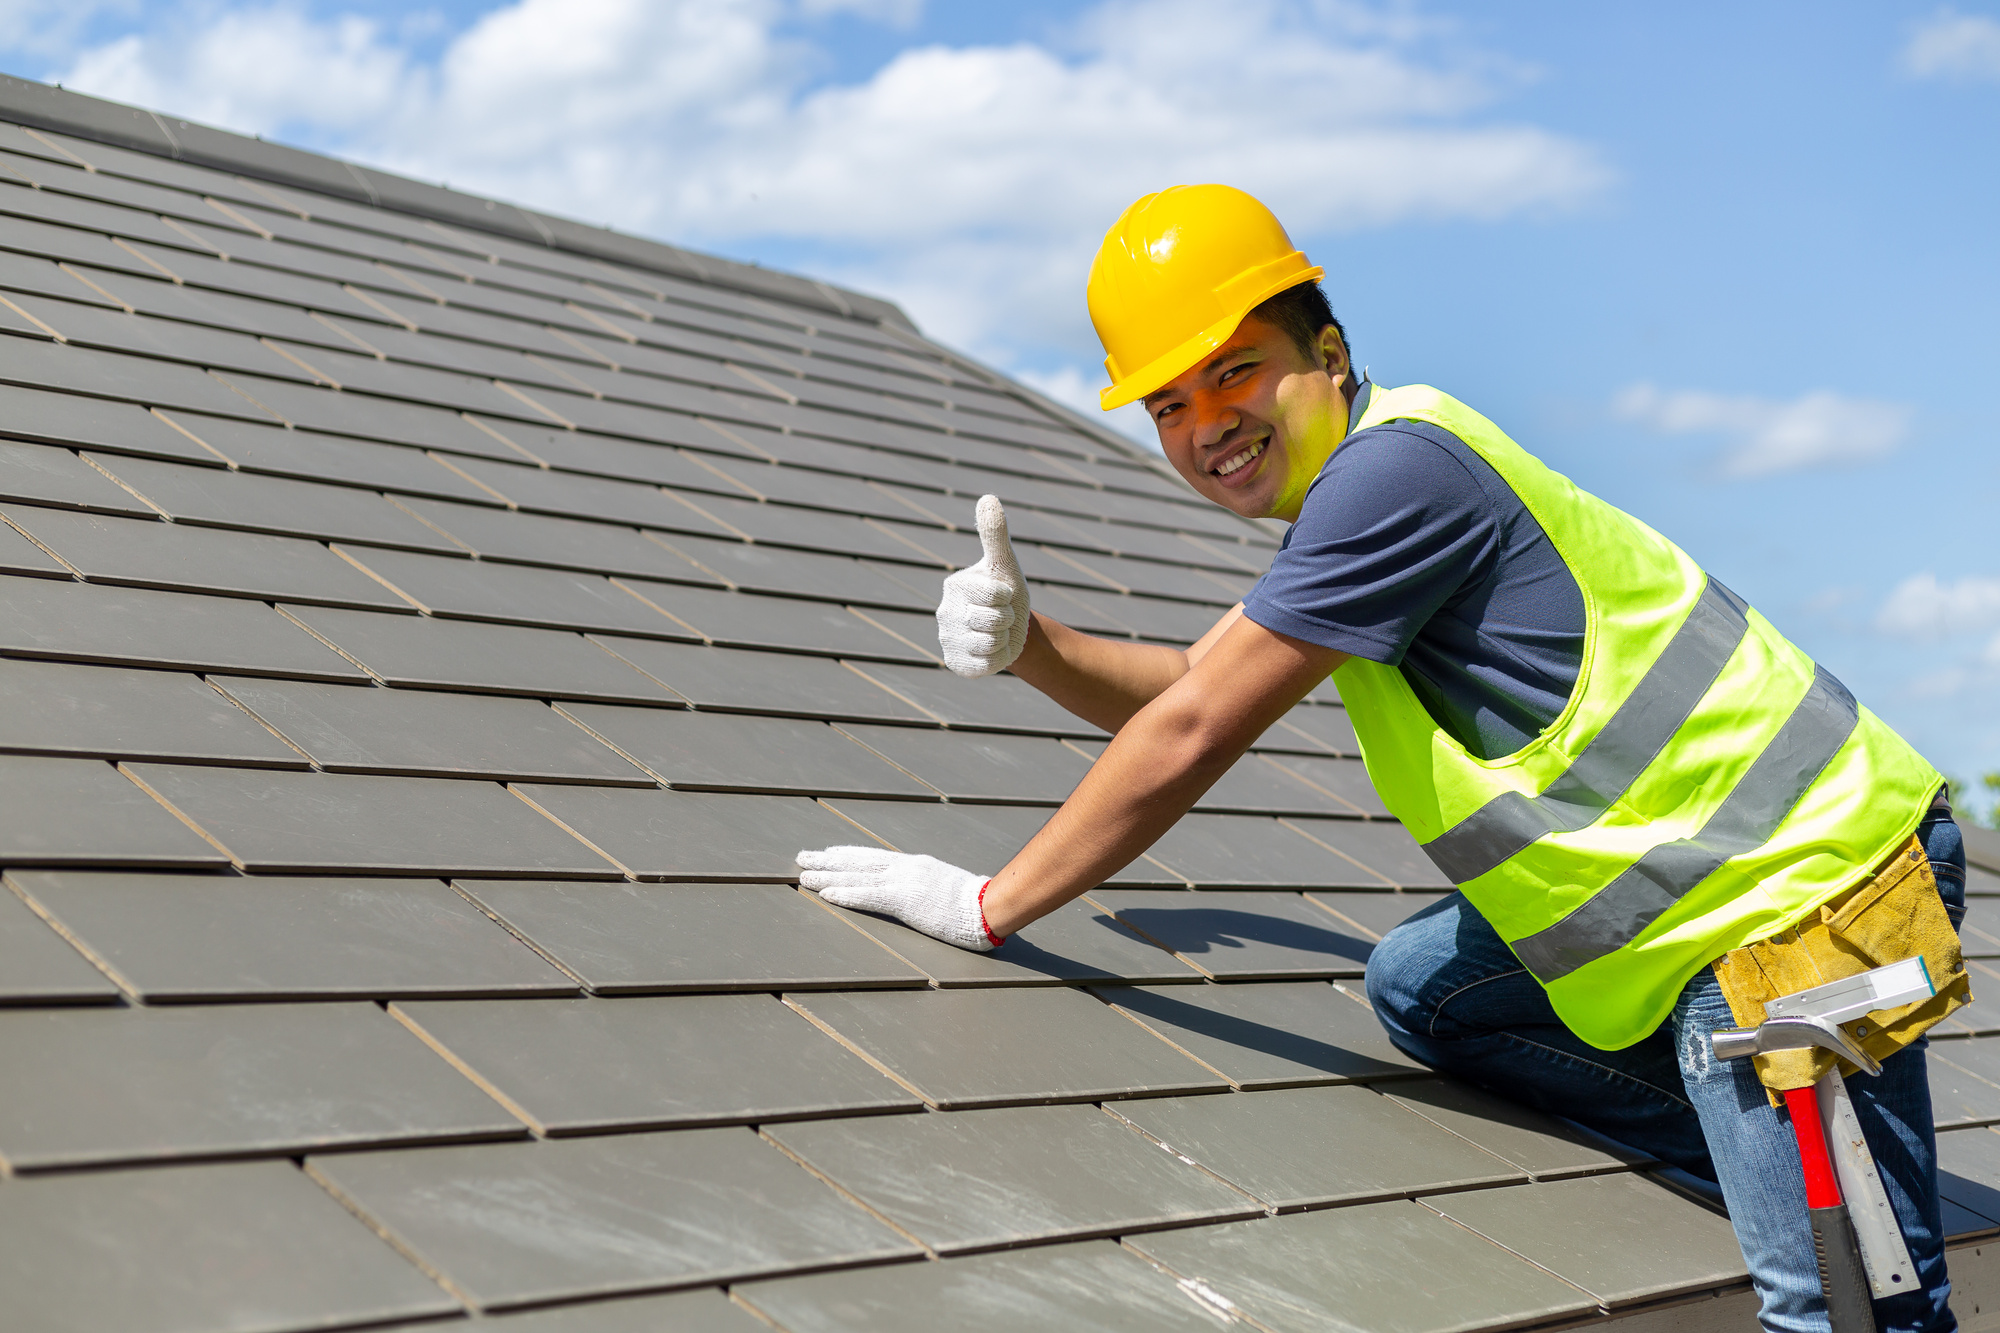 How to Select Residential Roofing Contractors: What You Need to Know